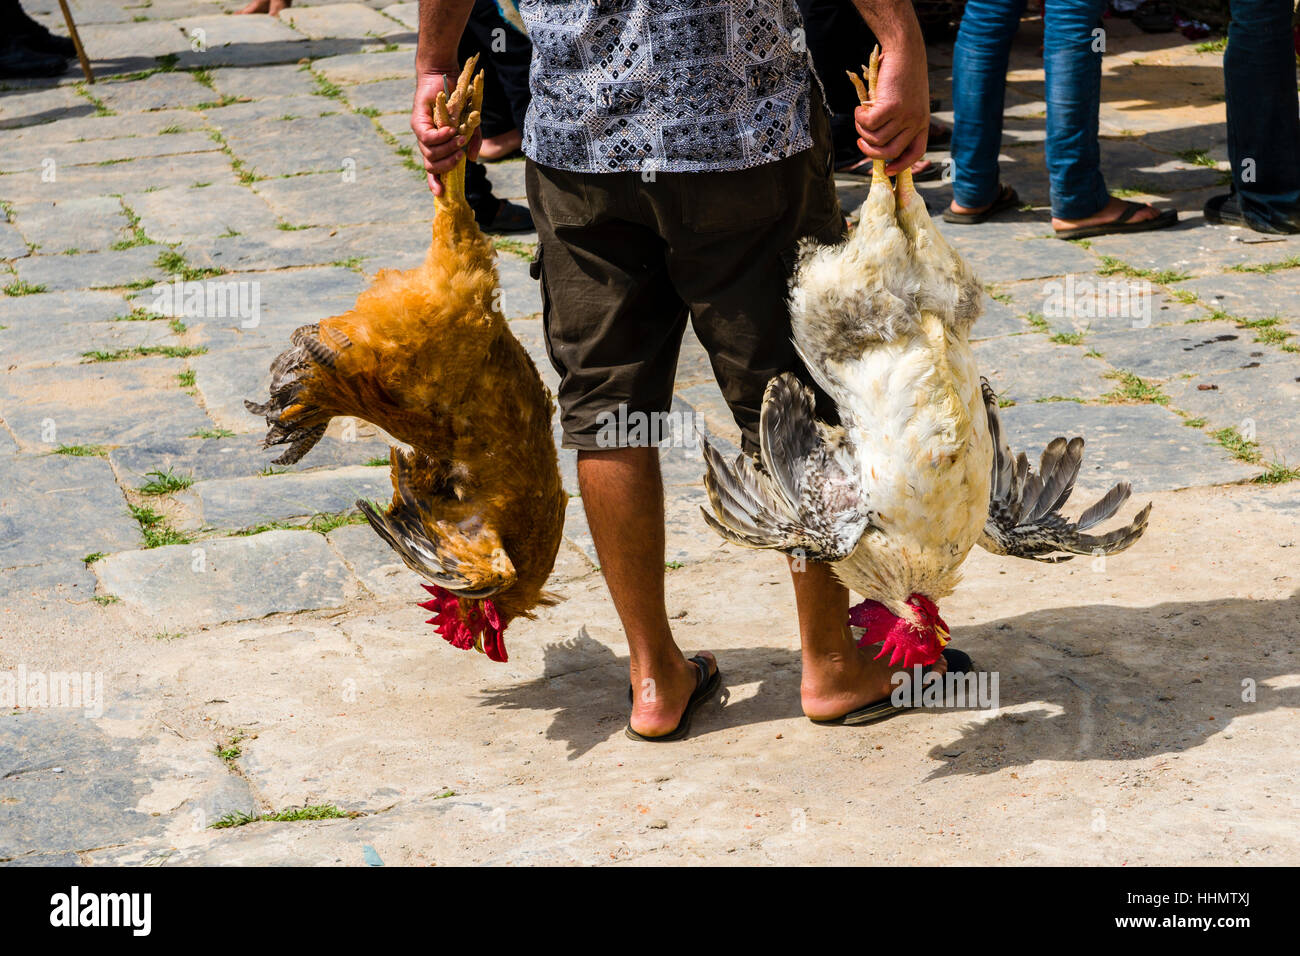 Man standing, holding two roosters by their legs that will be sacrificed at the Khadga Devi Mandir Temple Stock Photo